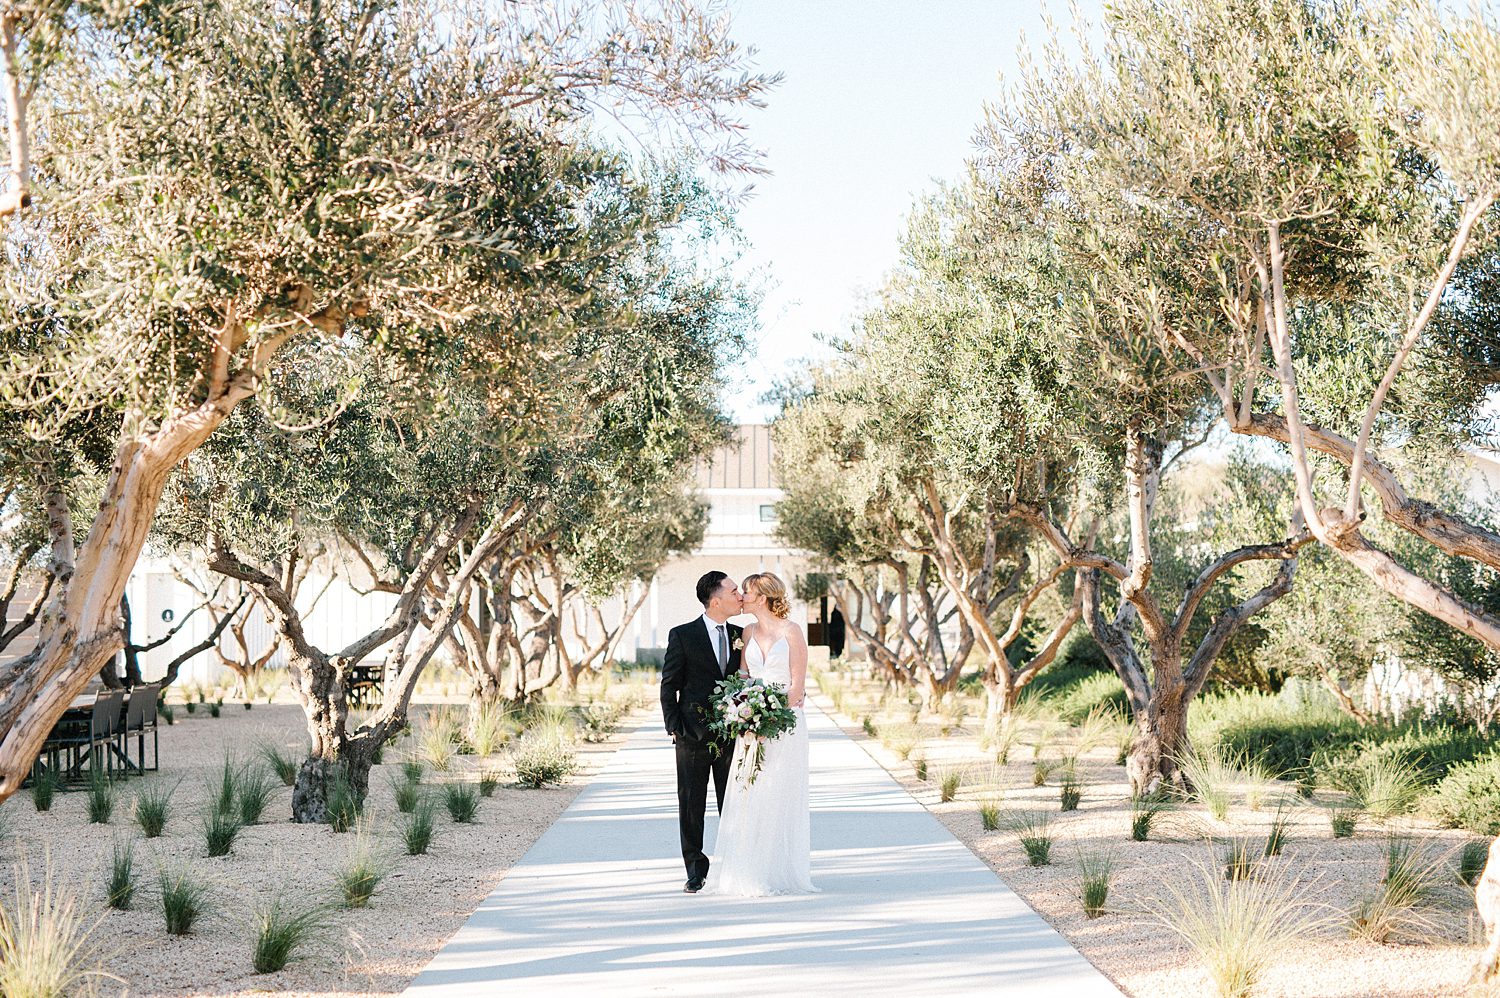 Bride and Groom within Olive Grove at Biddle Ranch Vineyard Wedding by Biddle Ranch Wedding Photographer Austyn Elizabeth Photography